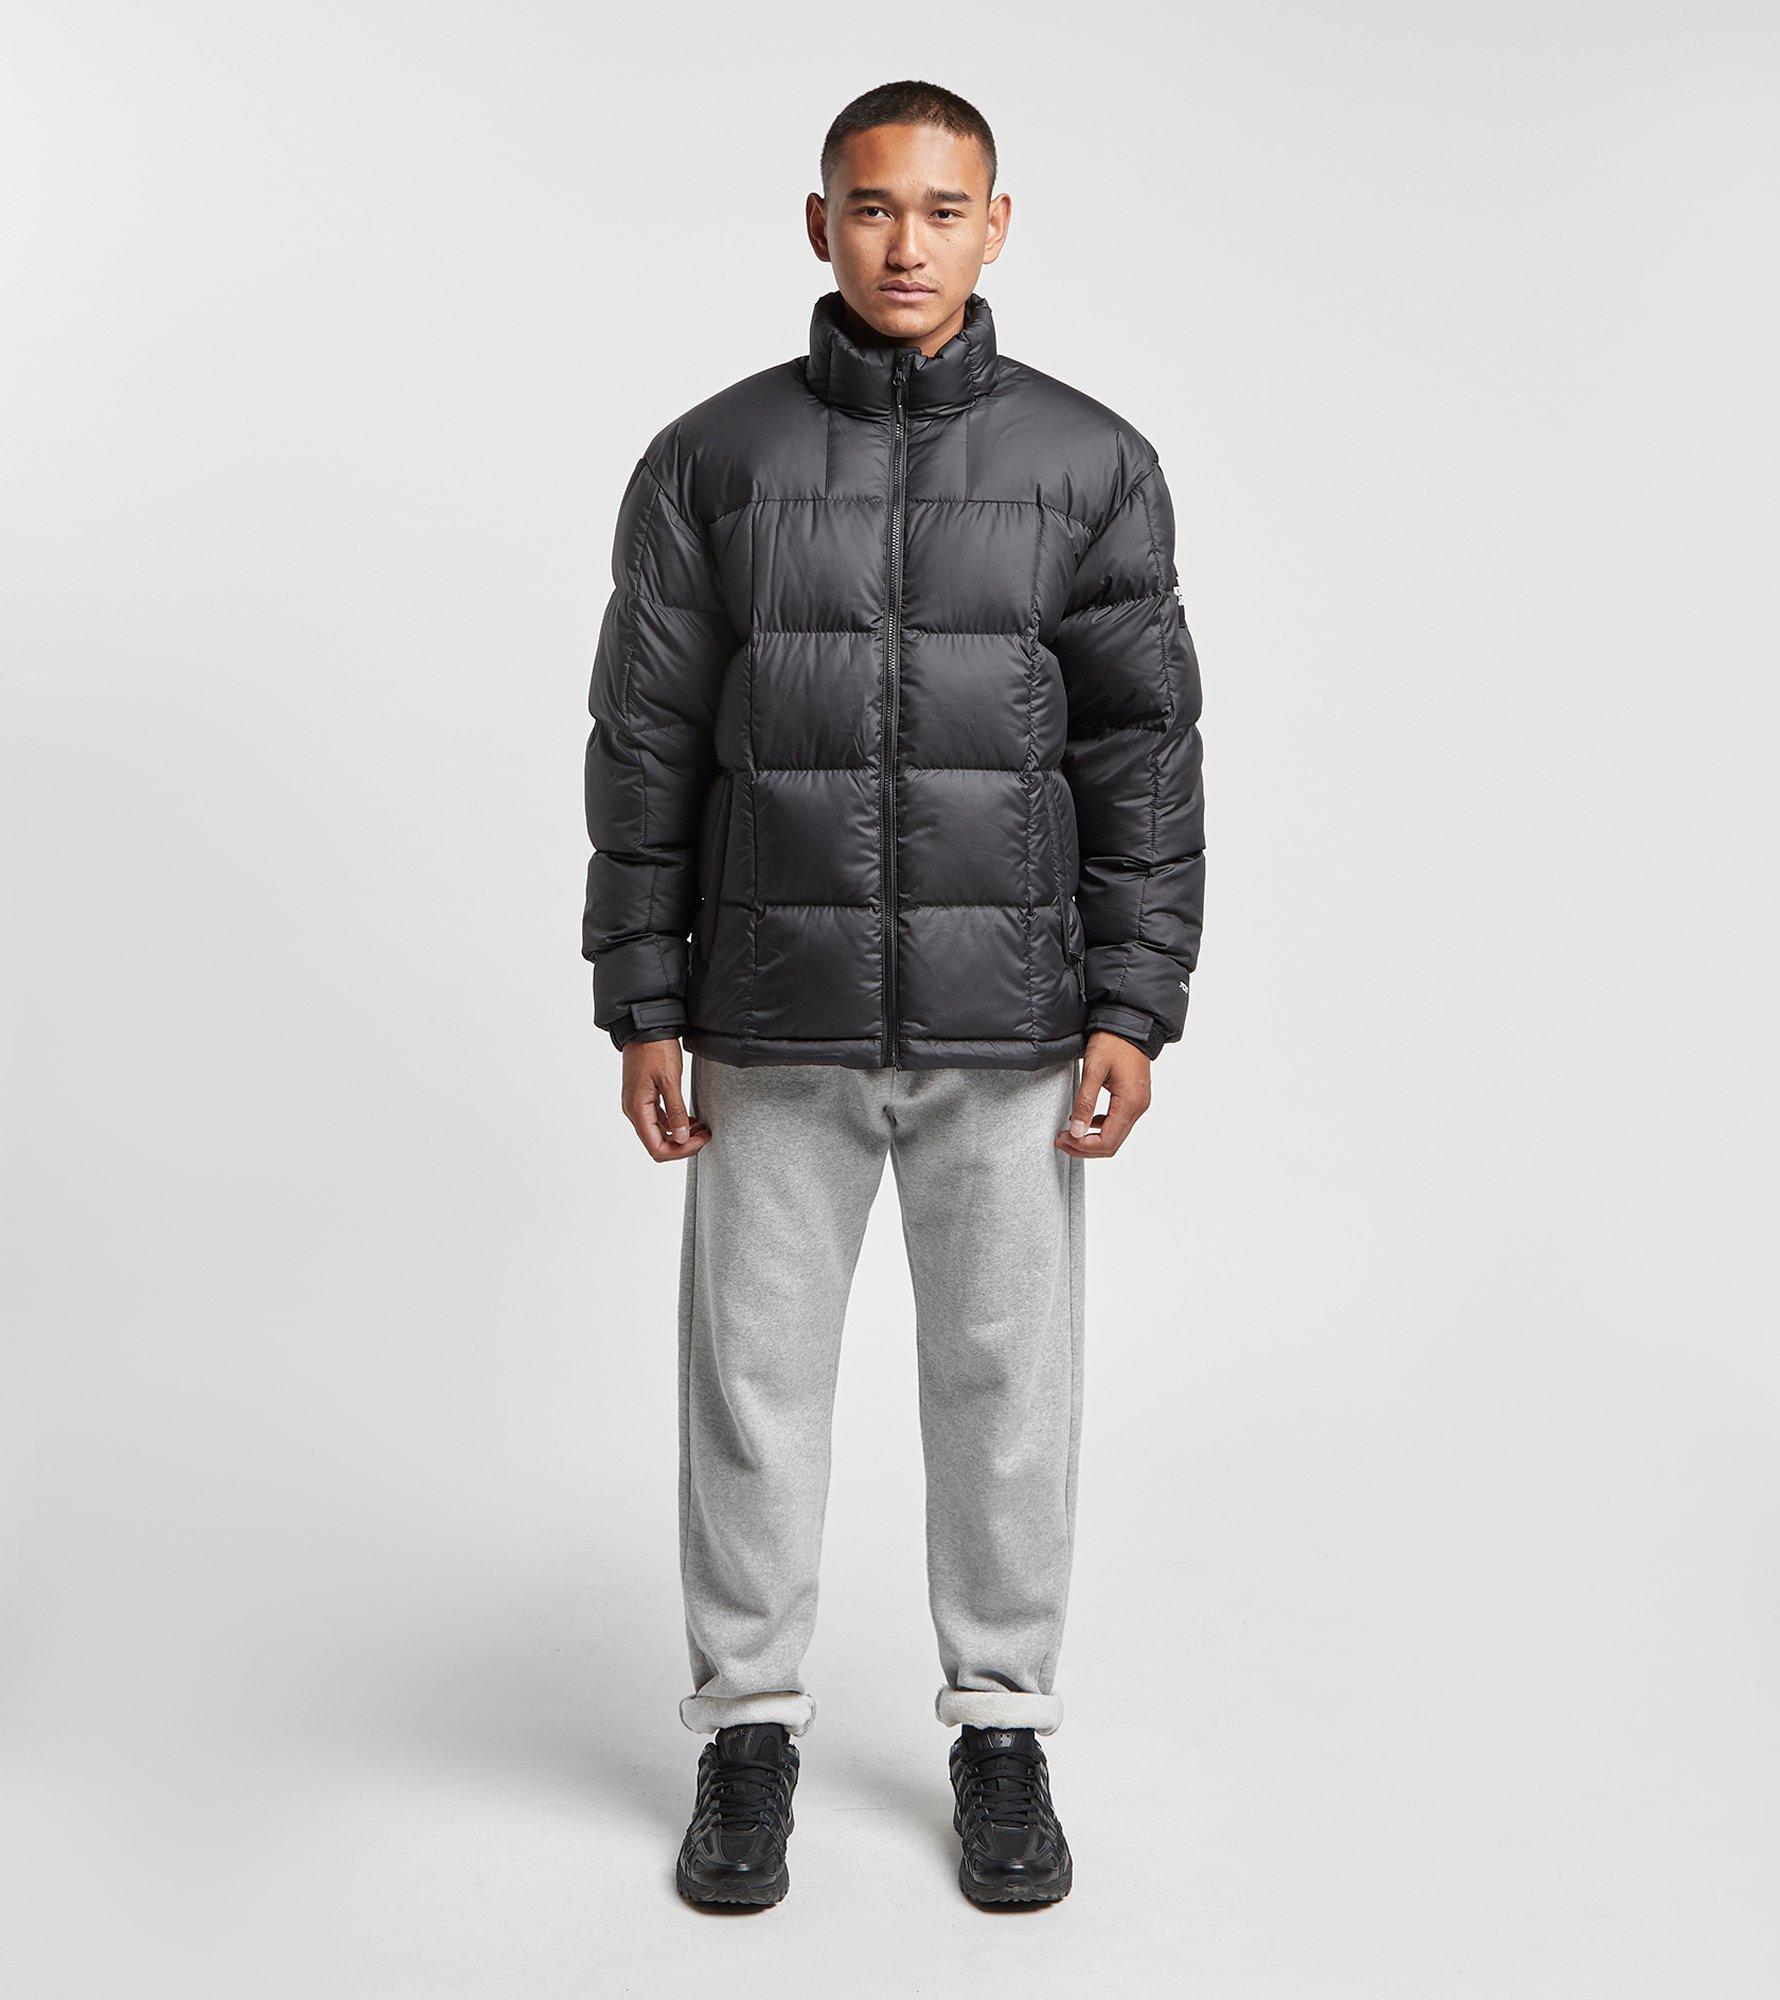 The North Face Goose Lhotse Down Jacket in Black for Men - Lyst